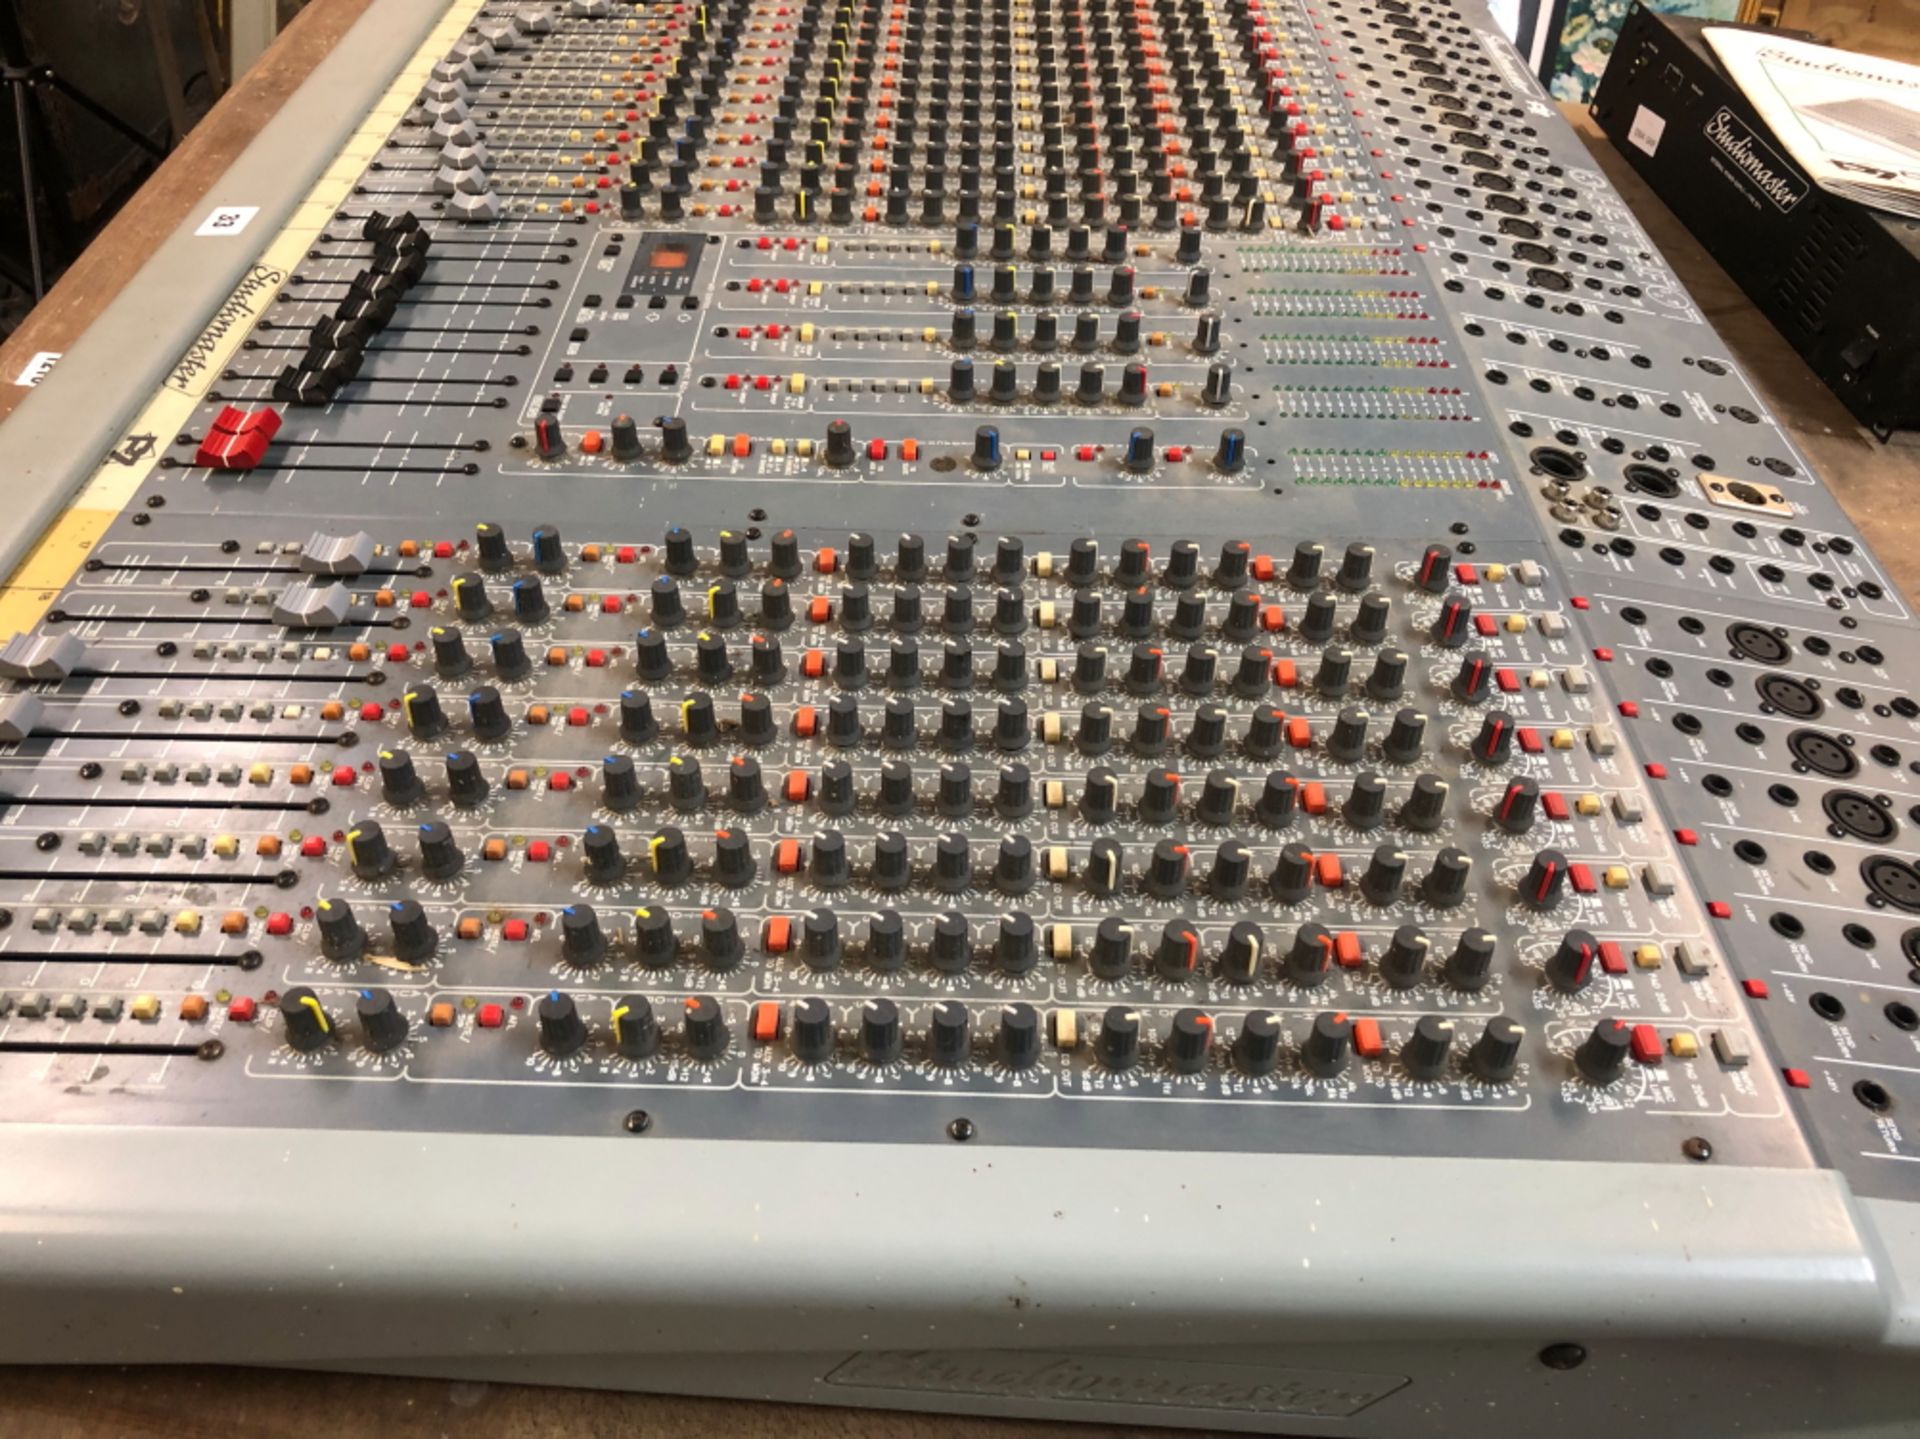 A STUDIO MASTER P7 MULTITRACK MIXING CONSOLE WITH MANUAL AND EXTERNAL POWER SUPPLY UNIT - Image 7 of 17